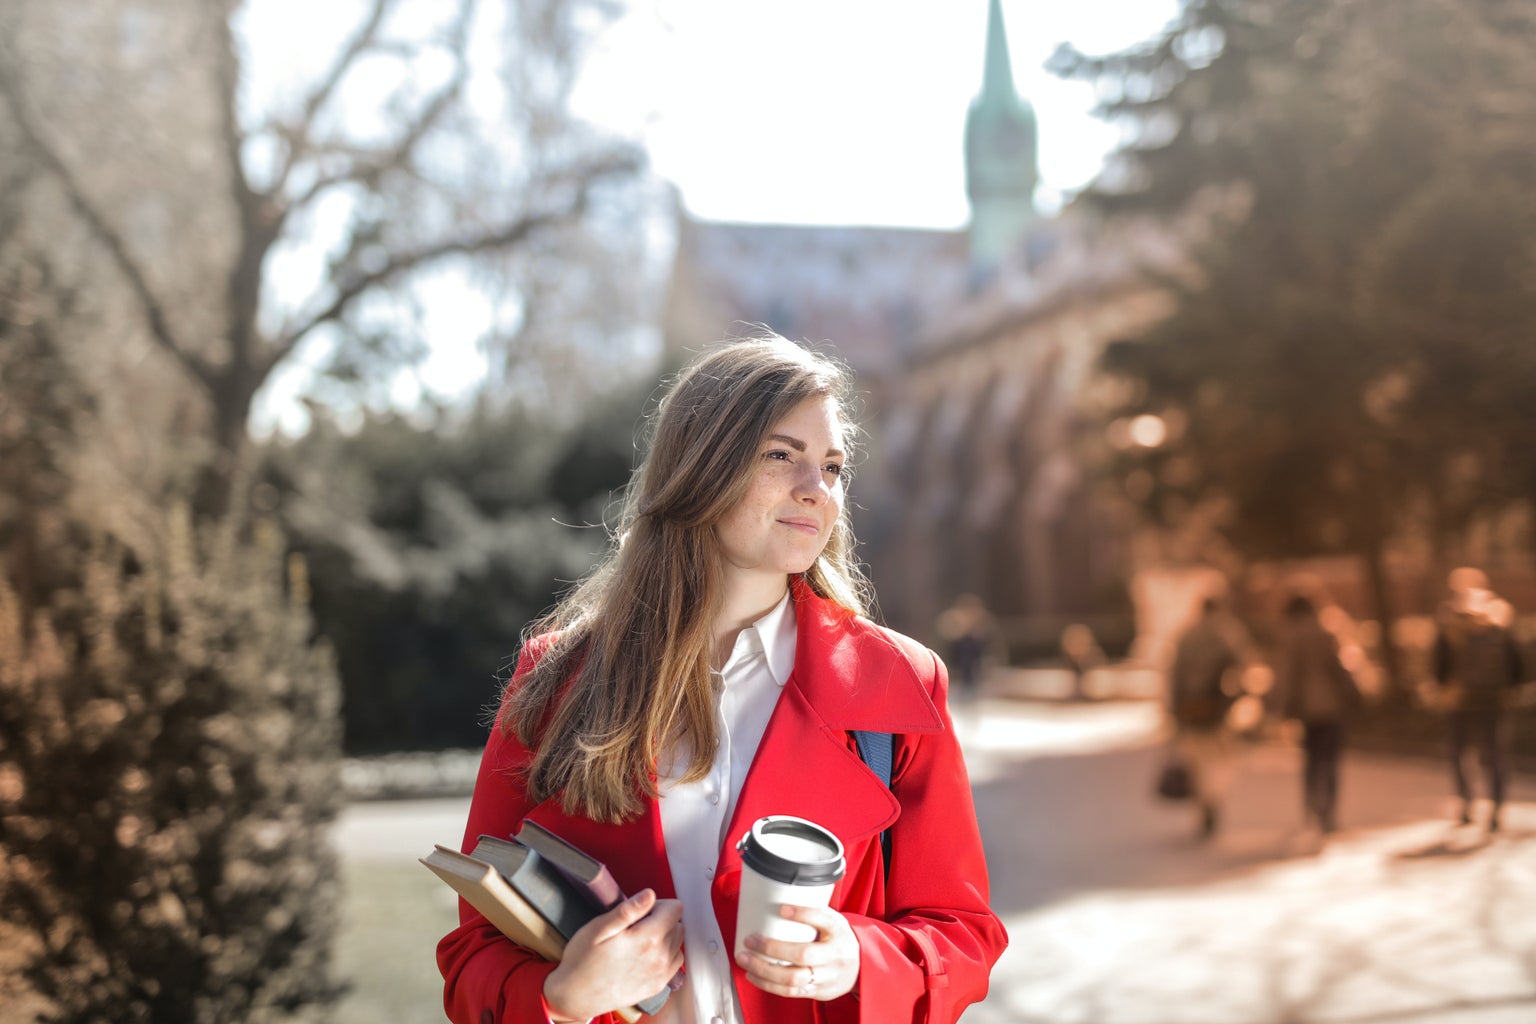 woman in red coat holding notebooks and coffee cup 3755760?width=1024&height=1024&fit=cover&auto=webp